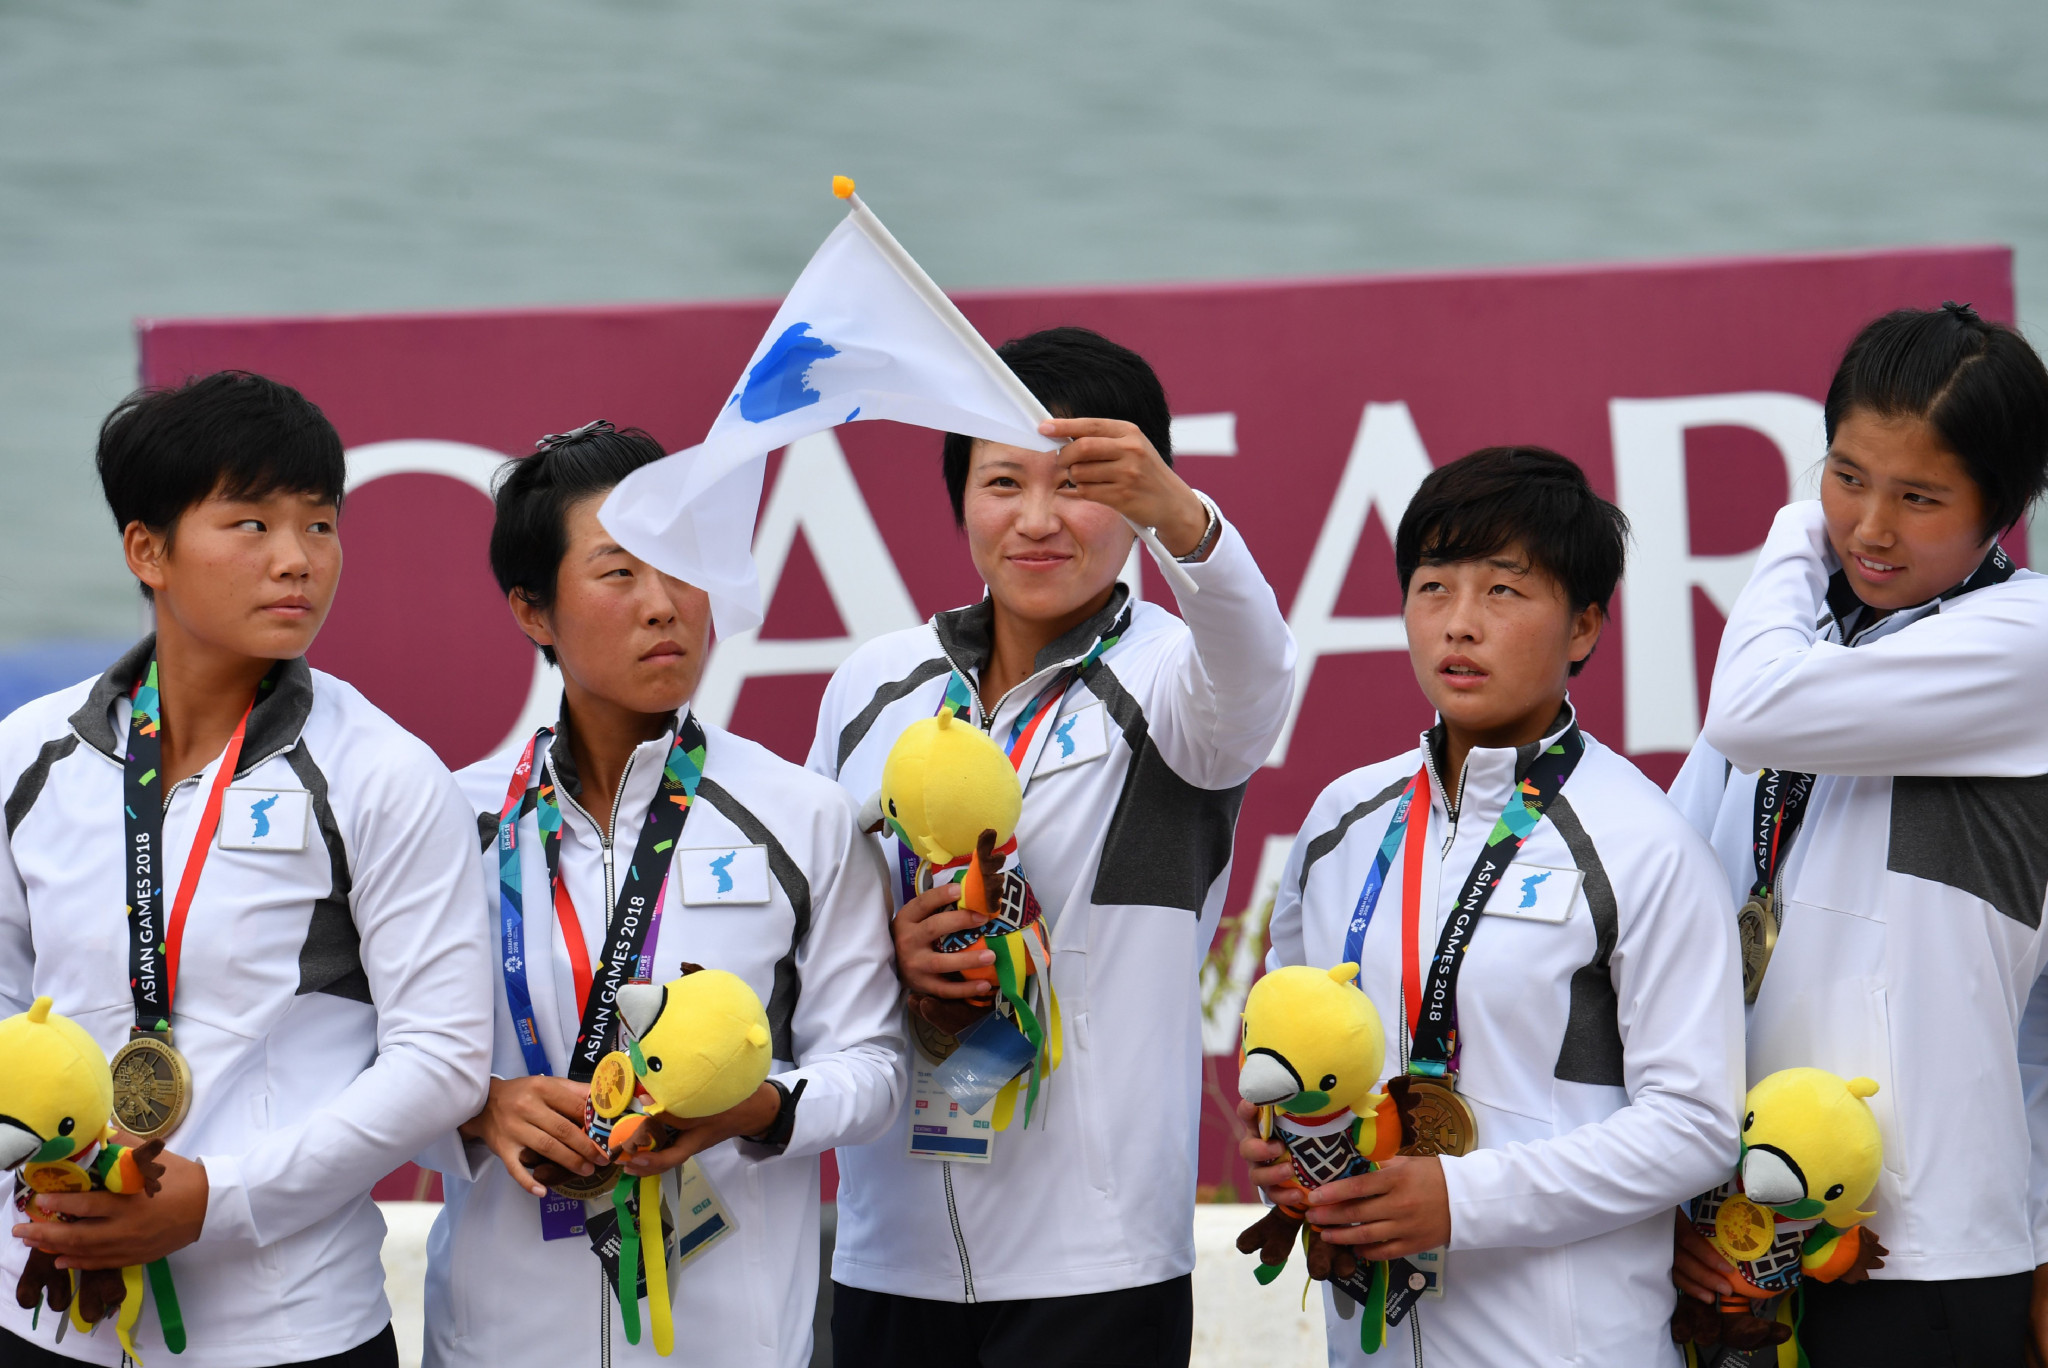 The Unified Korean team celebrate their bronze medal-winning performance in the women’s 200 metres dragon boat race at the 2018 Asian Games ©Getty Images